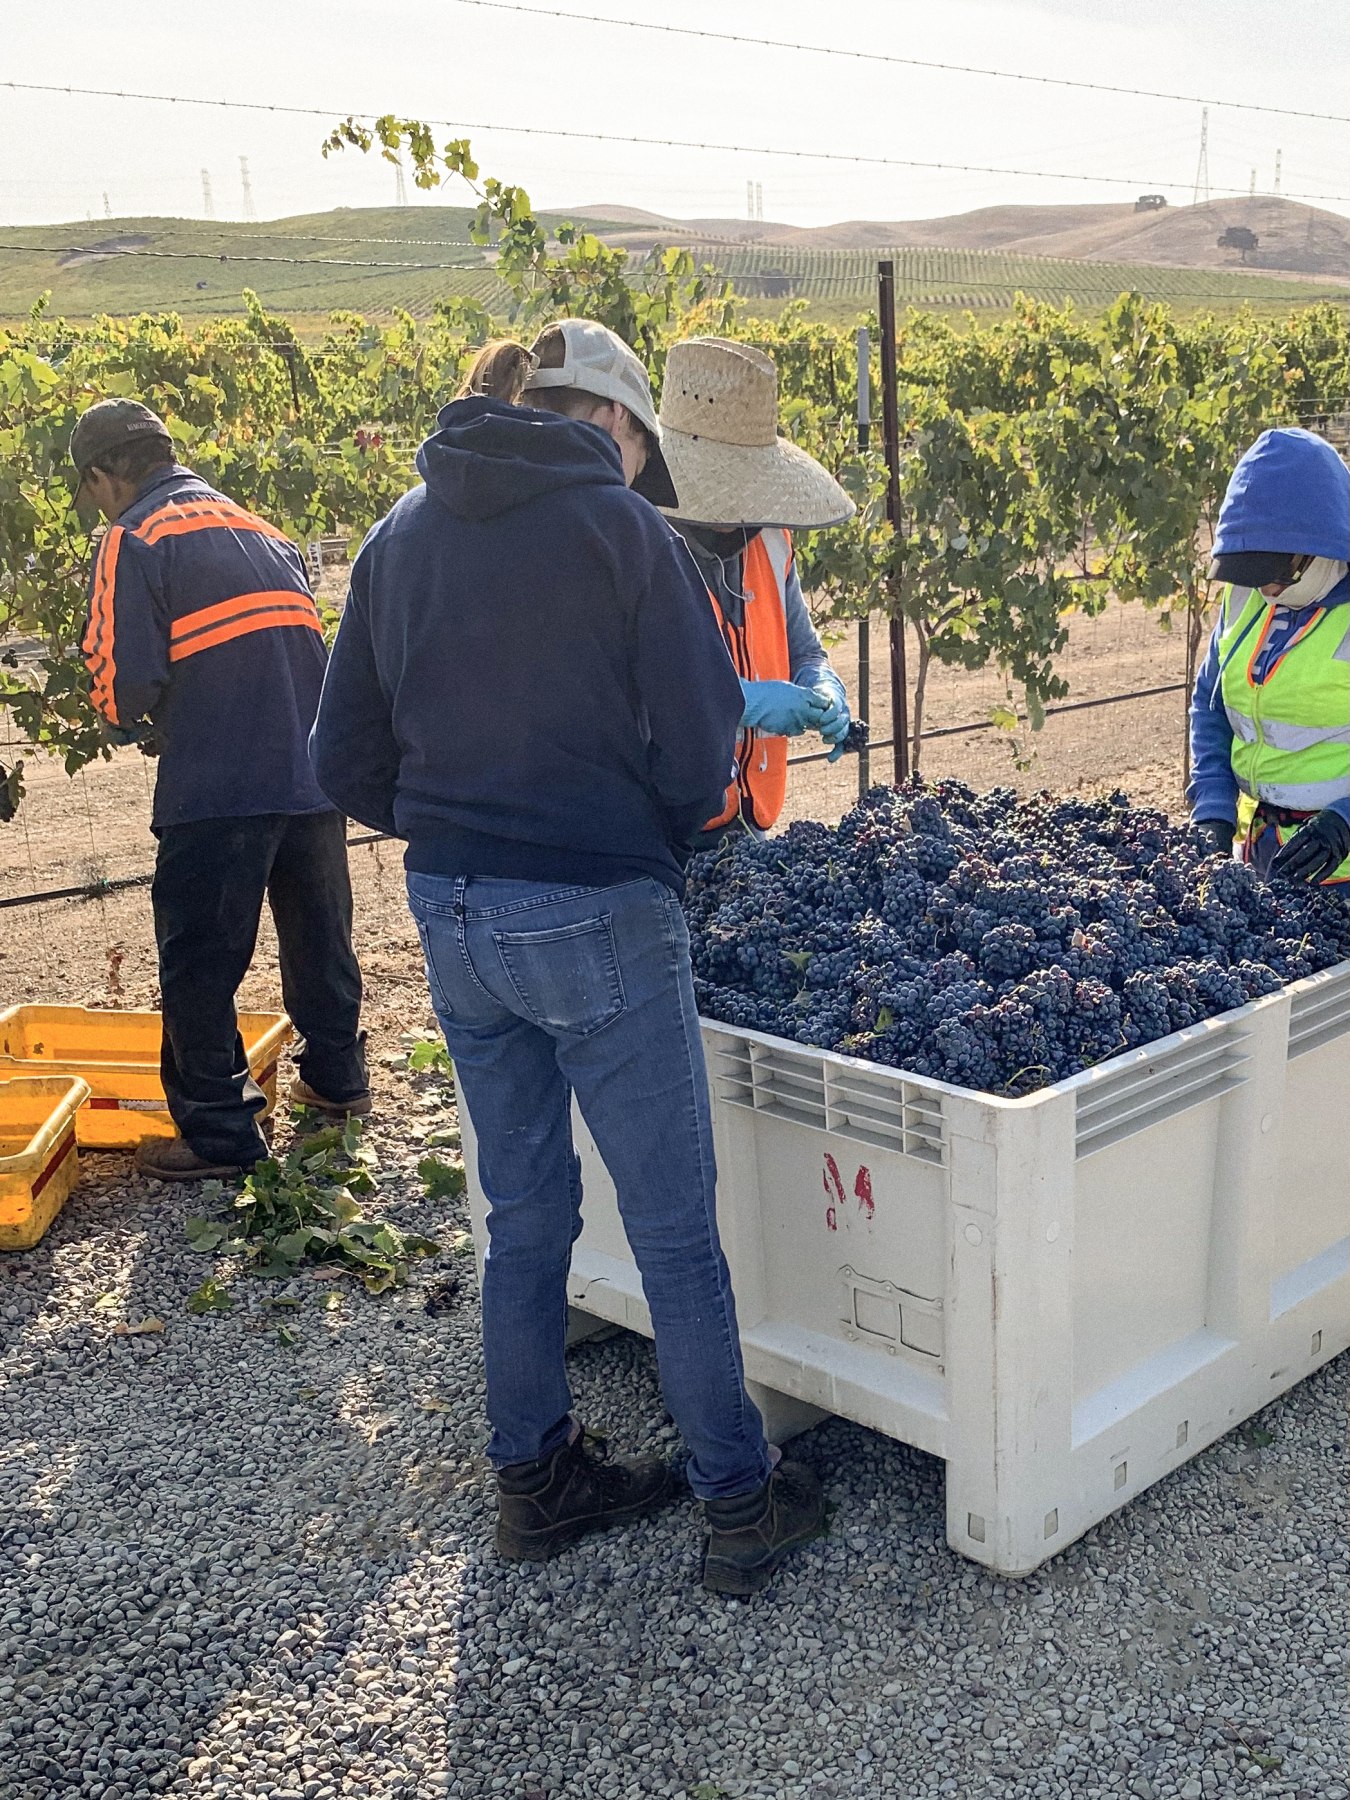 Winemaker Meredith Sarboraria and some field workers stand around a bin of picked grapes from the RM estate vineyard